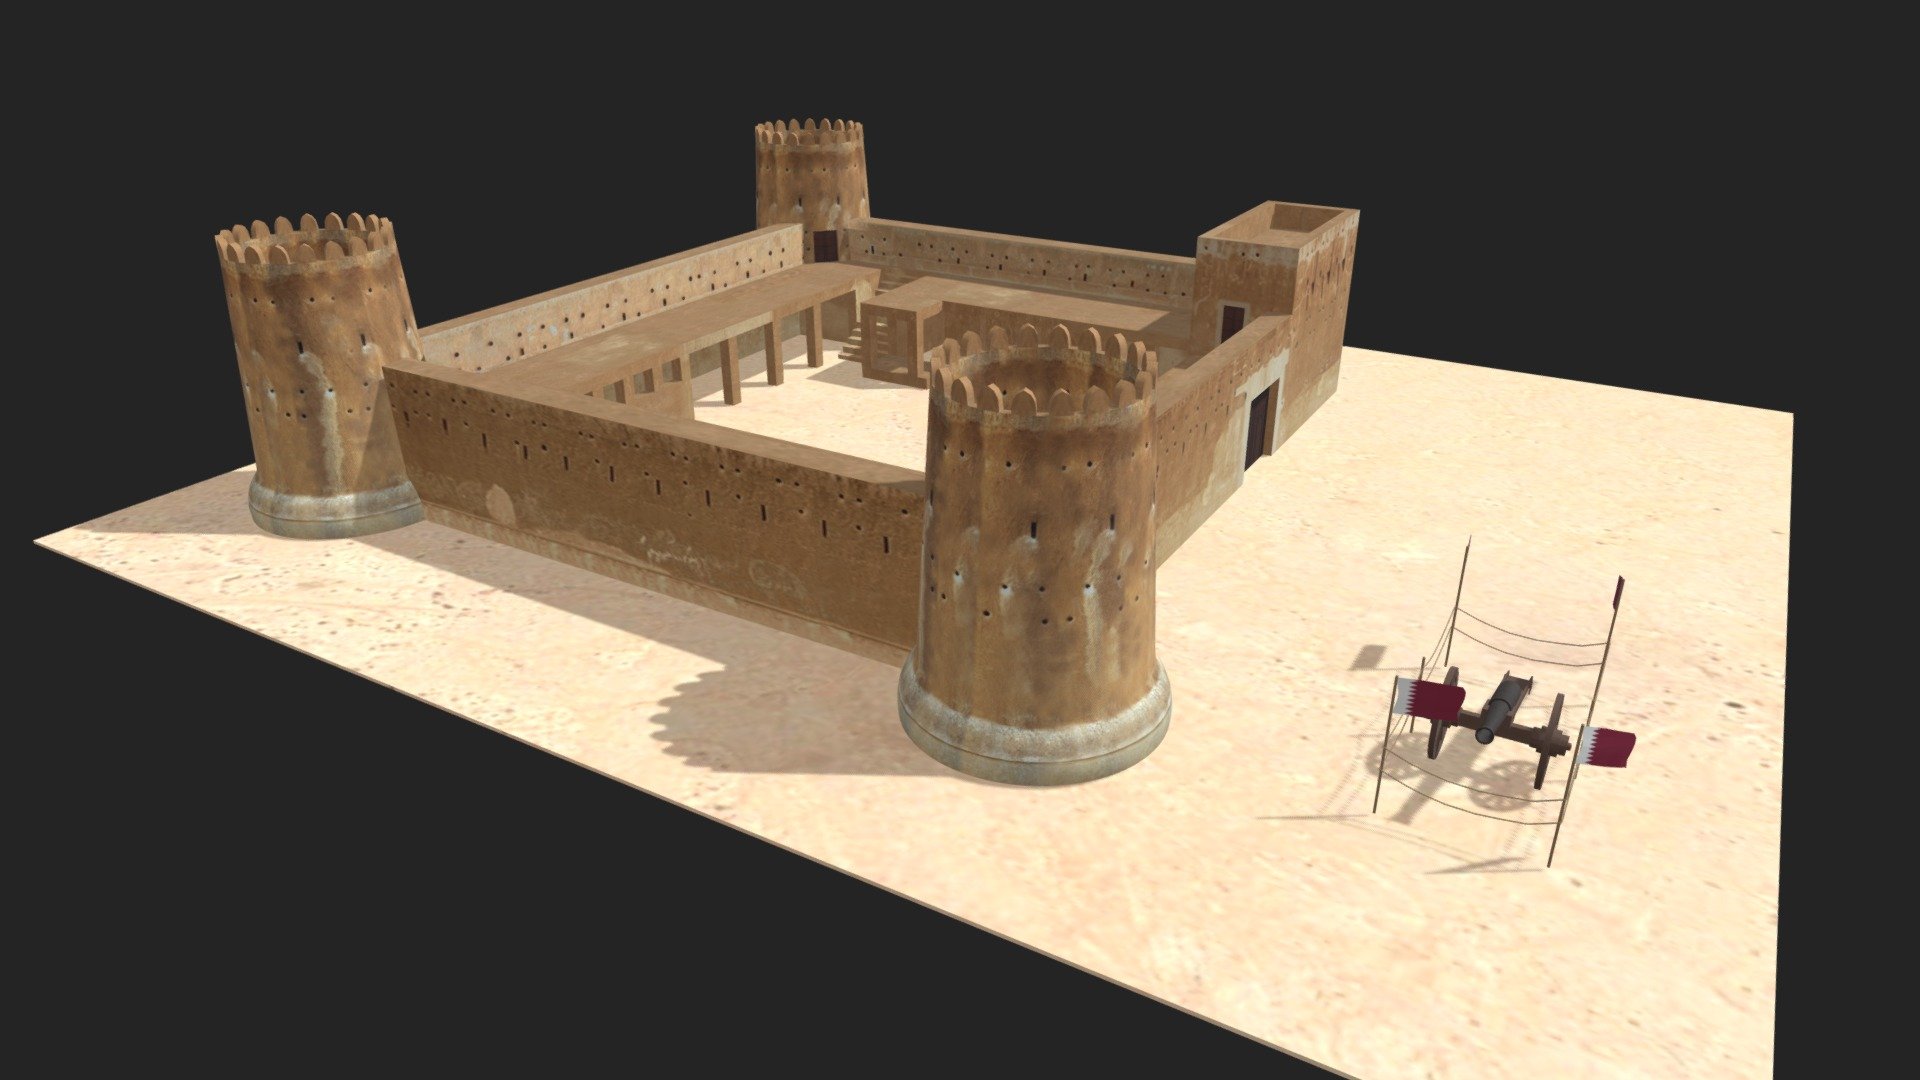 Zubara Fort Qatar
Originally created with 3ds Max 2015 and rendered in V-Ray 3.0. 

Total Poly Counts:
Poly Count = 8437
Vertex Count = 8228 - Zubara Fort Qatar - 3D model by nuralam018 3d model